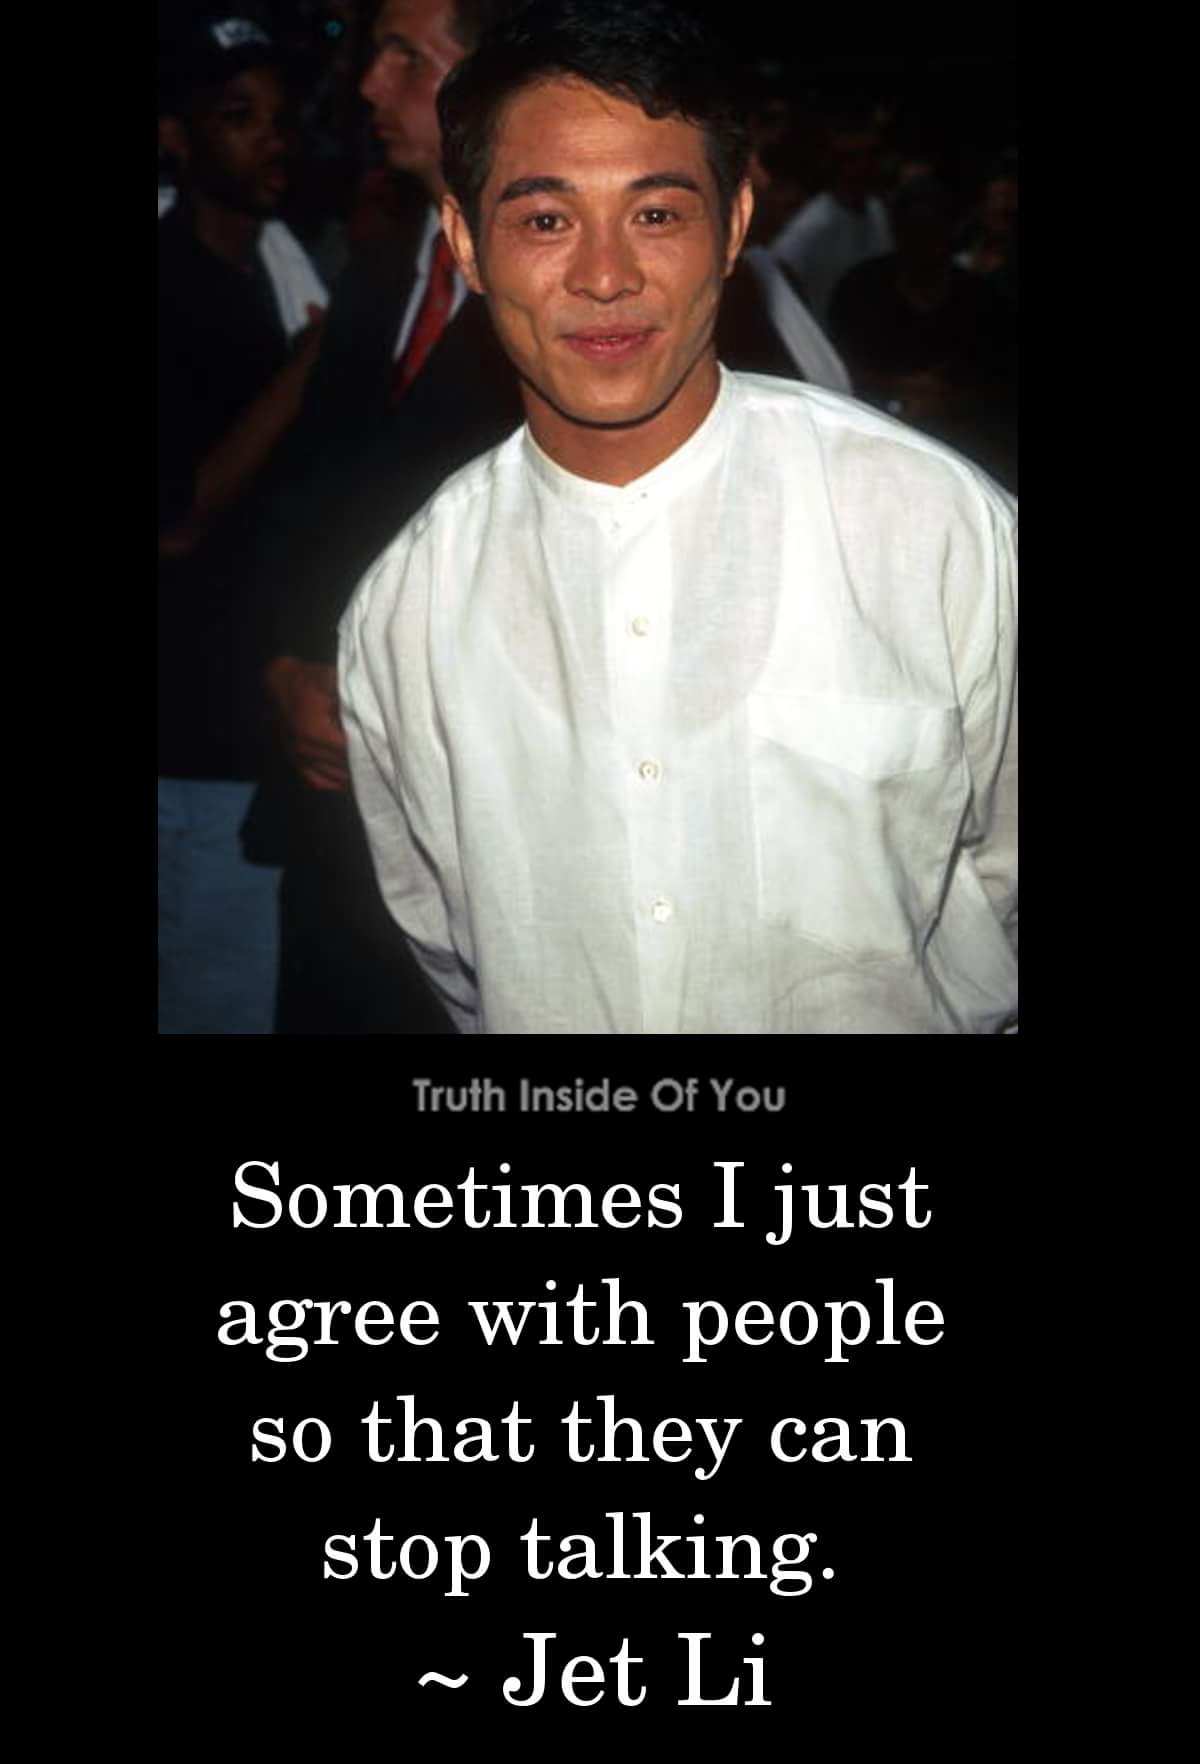 jet li 1990 - Truth Inside Of You Sometimes I just agree with people so that they can stop talking. ~ Jet Li